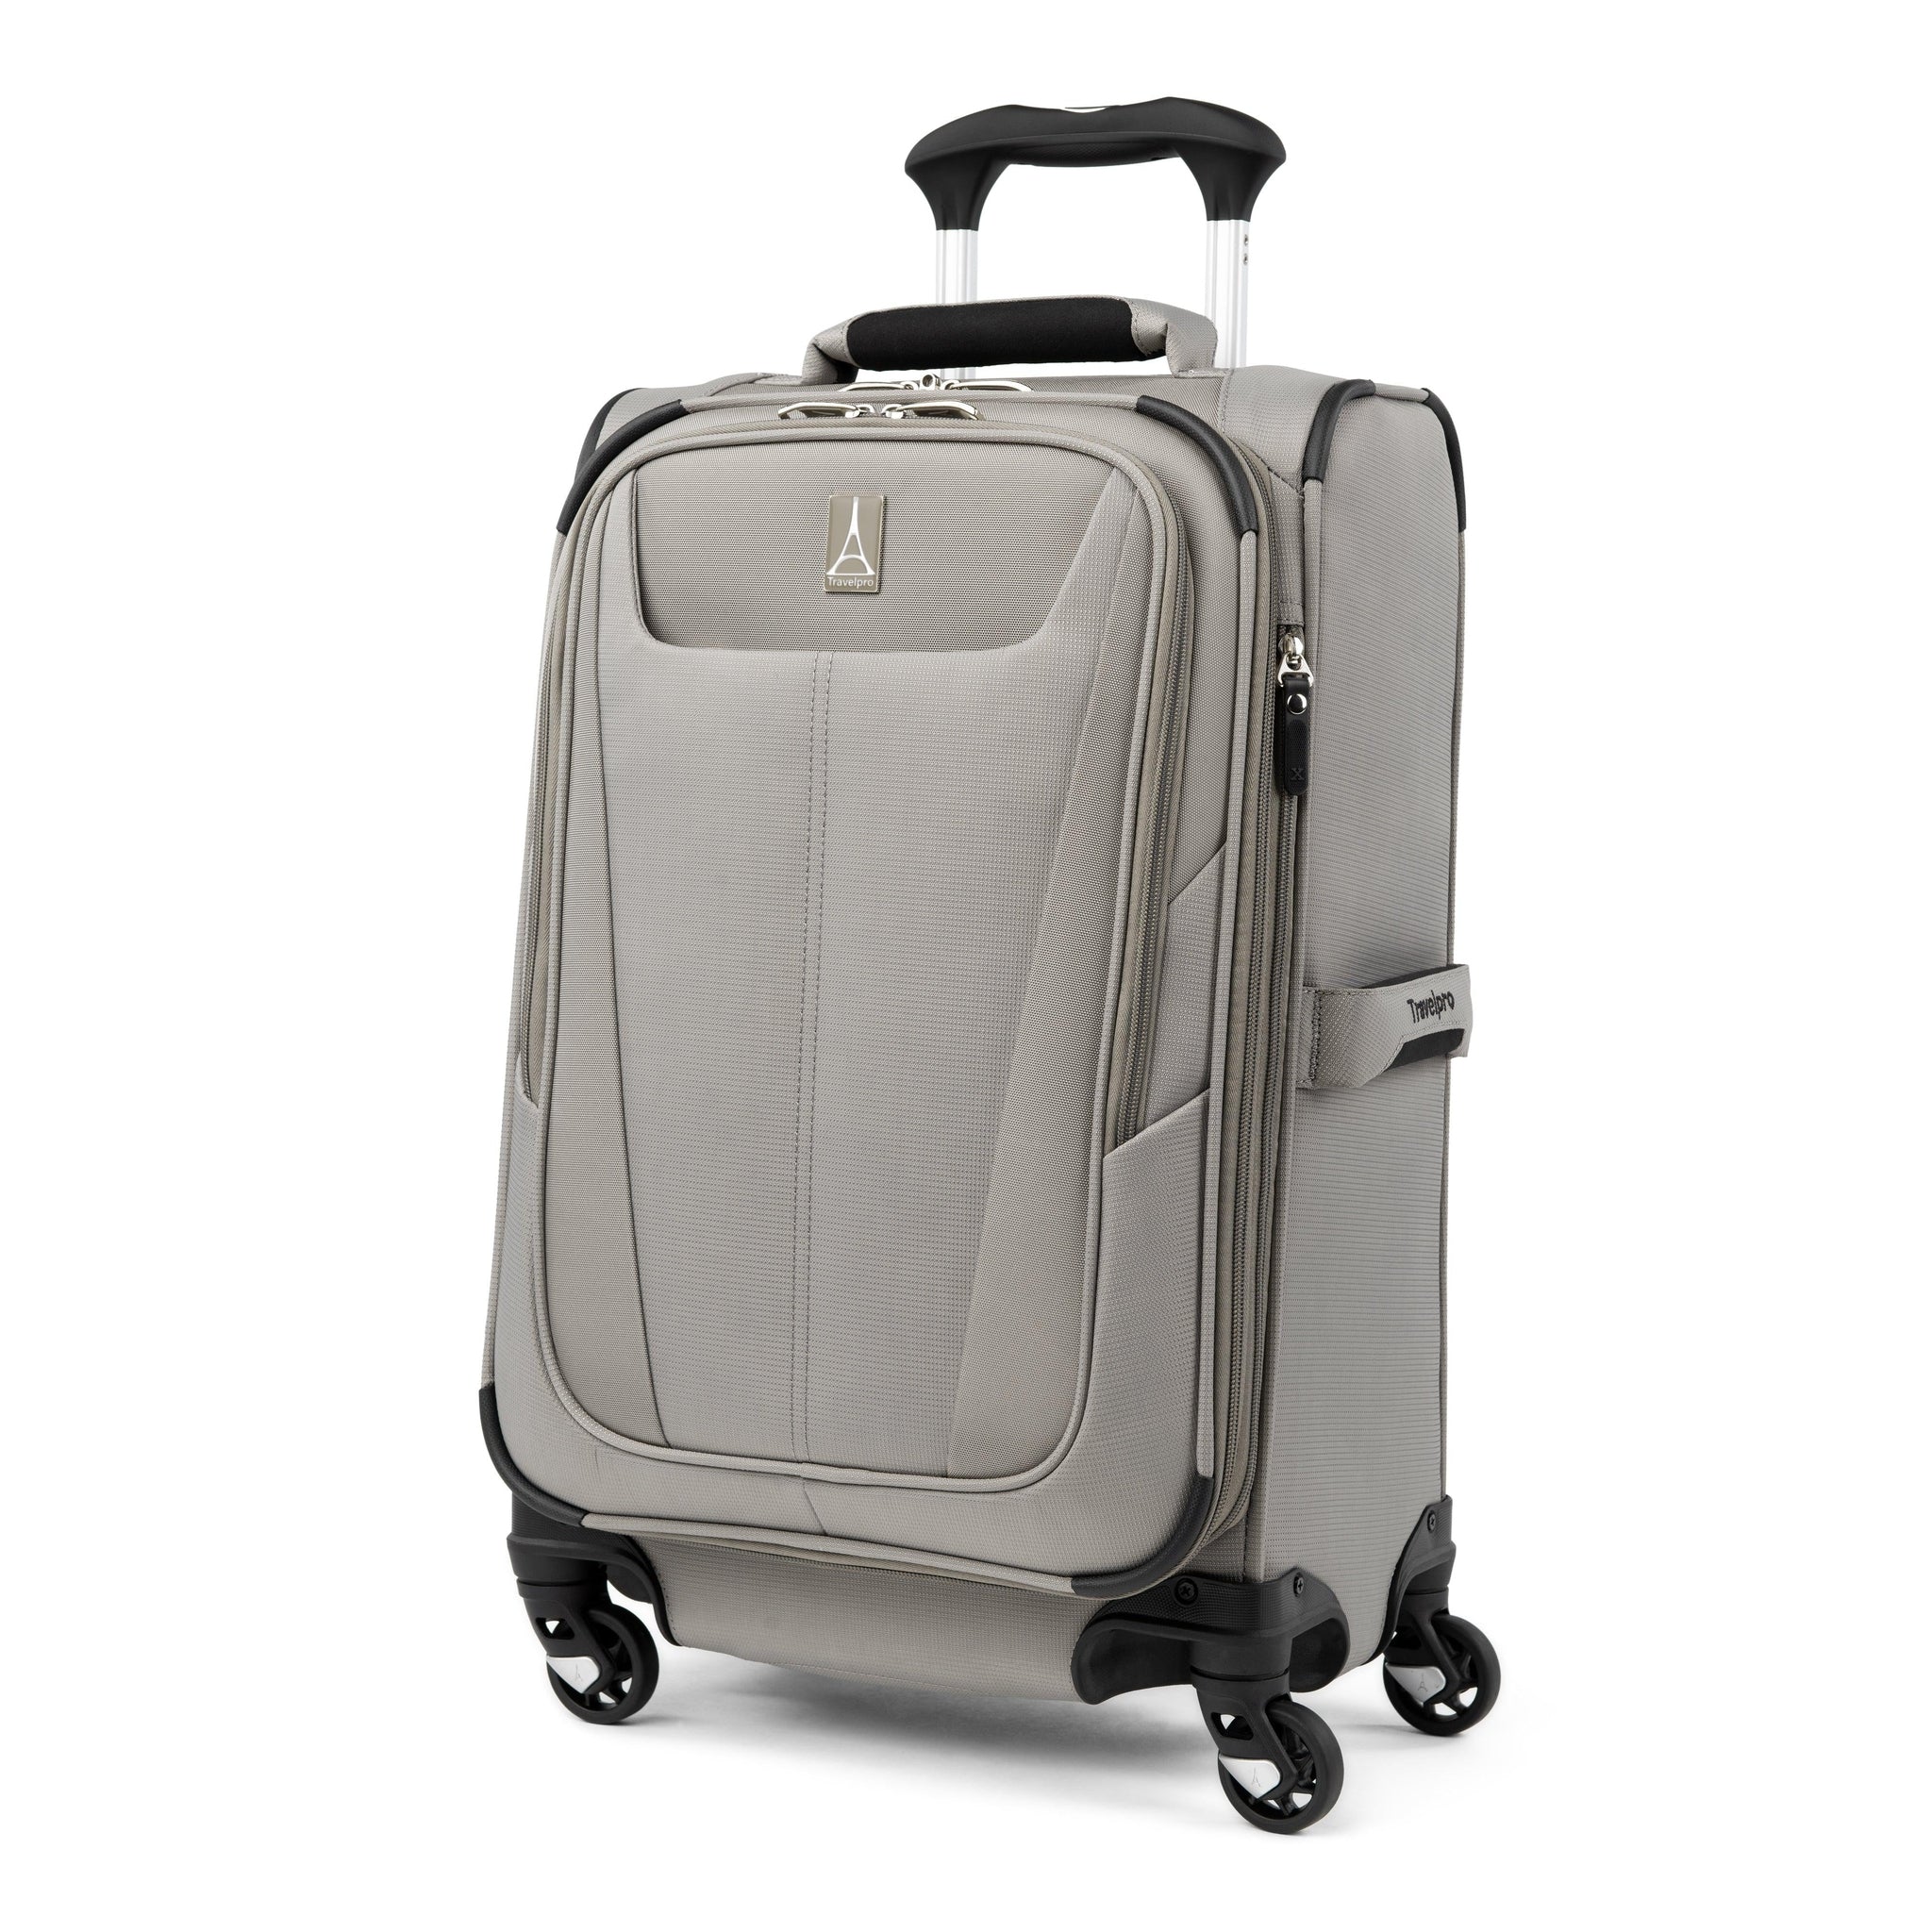 Travelpro Maxlite 5 Lightweight Carry-On Rolling Garment Bag – Luggage Pros